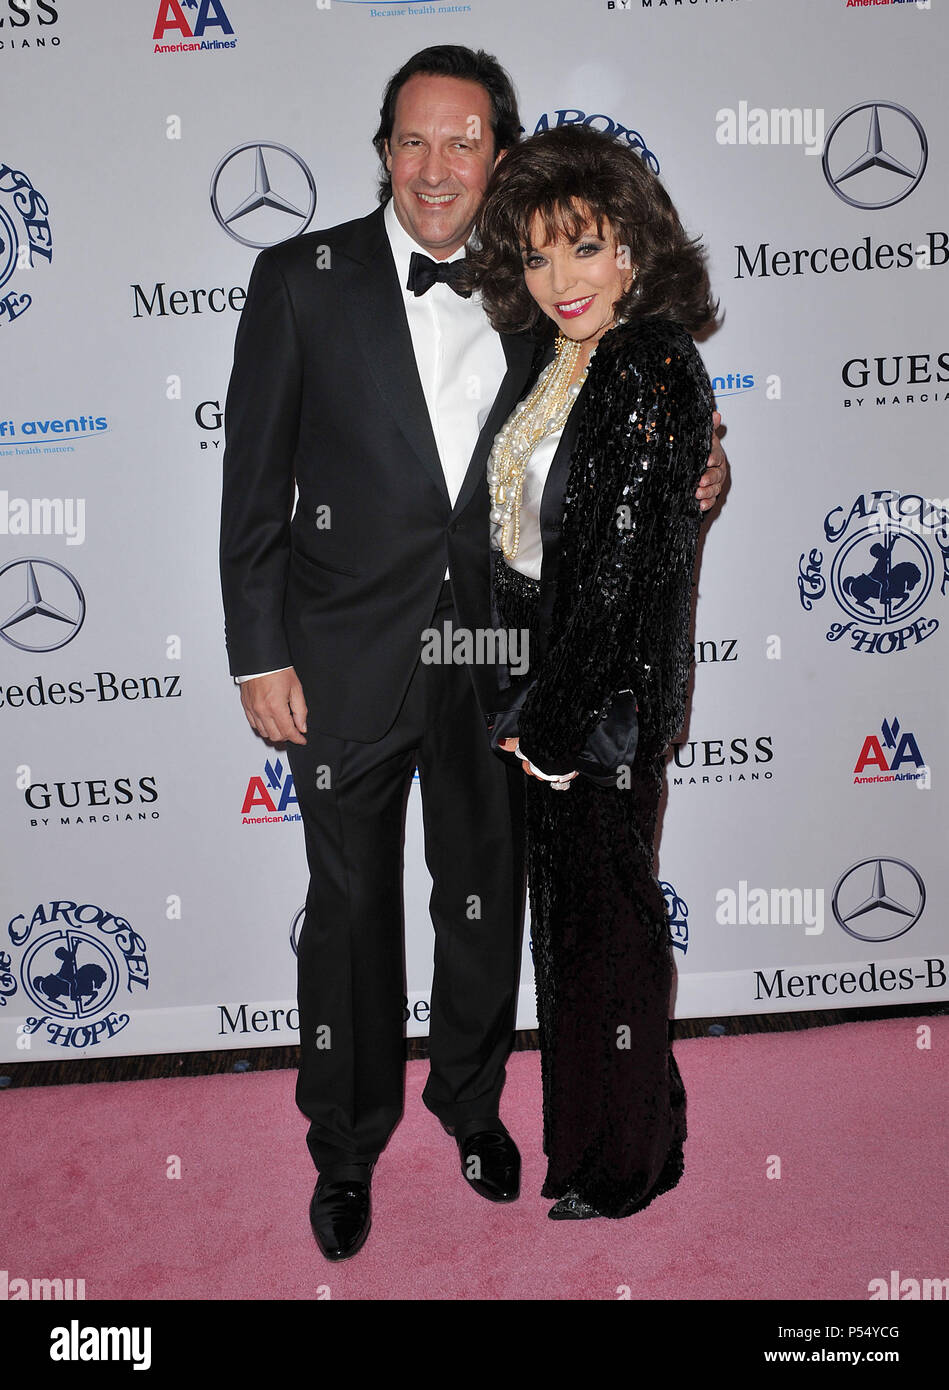 Joan Collins and husband   - Carousel Of Hope at the Beverly Hilton Hotel In LosAngeles.Joan Collins, husband 26  Event in Hollywood Life - California, Red Carpet Event, USA, Film Industry, Celebrities, Photography, Bestof, Arts Culture and Entertainment, Celebrities fashion, Best of, Hollywood Life, Event in Hollywood Life - California, Red Carpet and backstage, Music celebrities, Topix, Couple, family ( husband and wife ) and kids- Children, brothers and sisters inquiry tsuni@Gamma-USA.com, Credit Tsuni / USA, 2010 Stock Photo